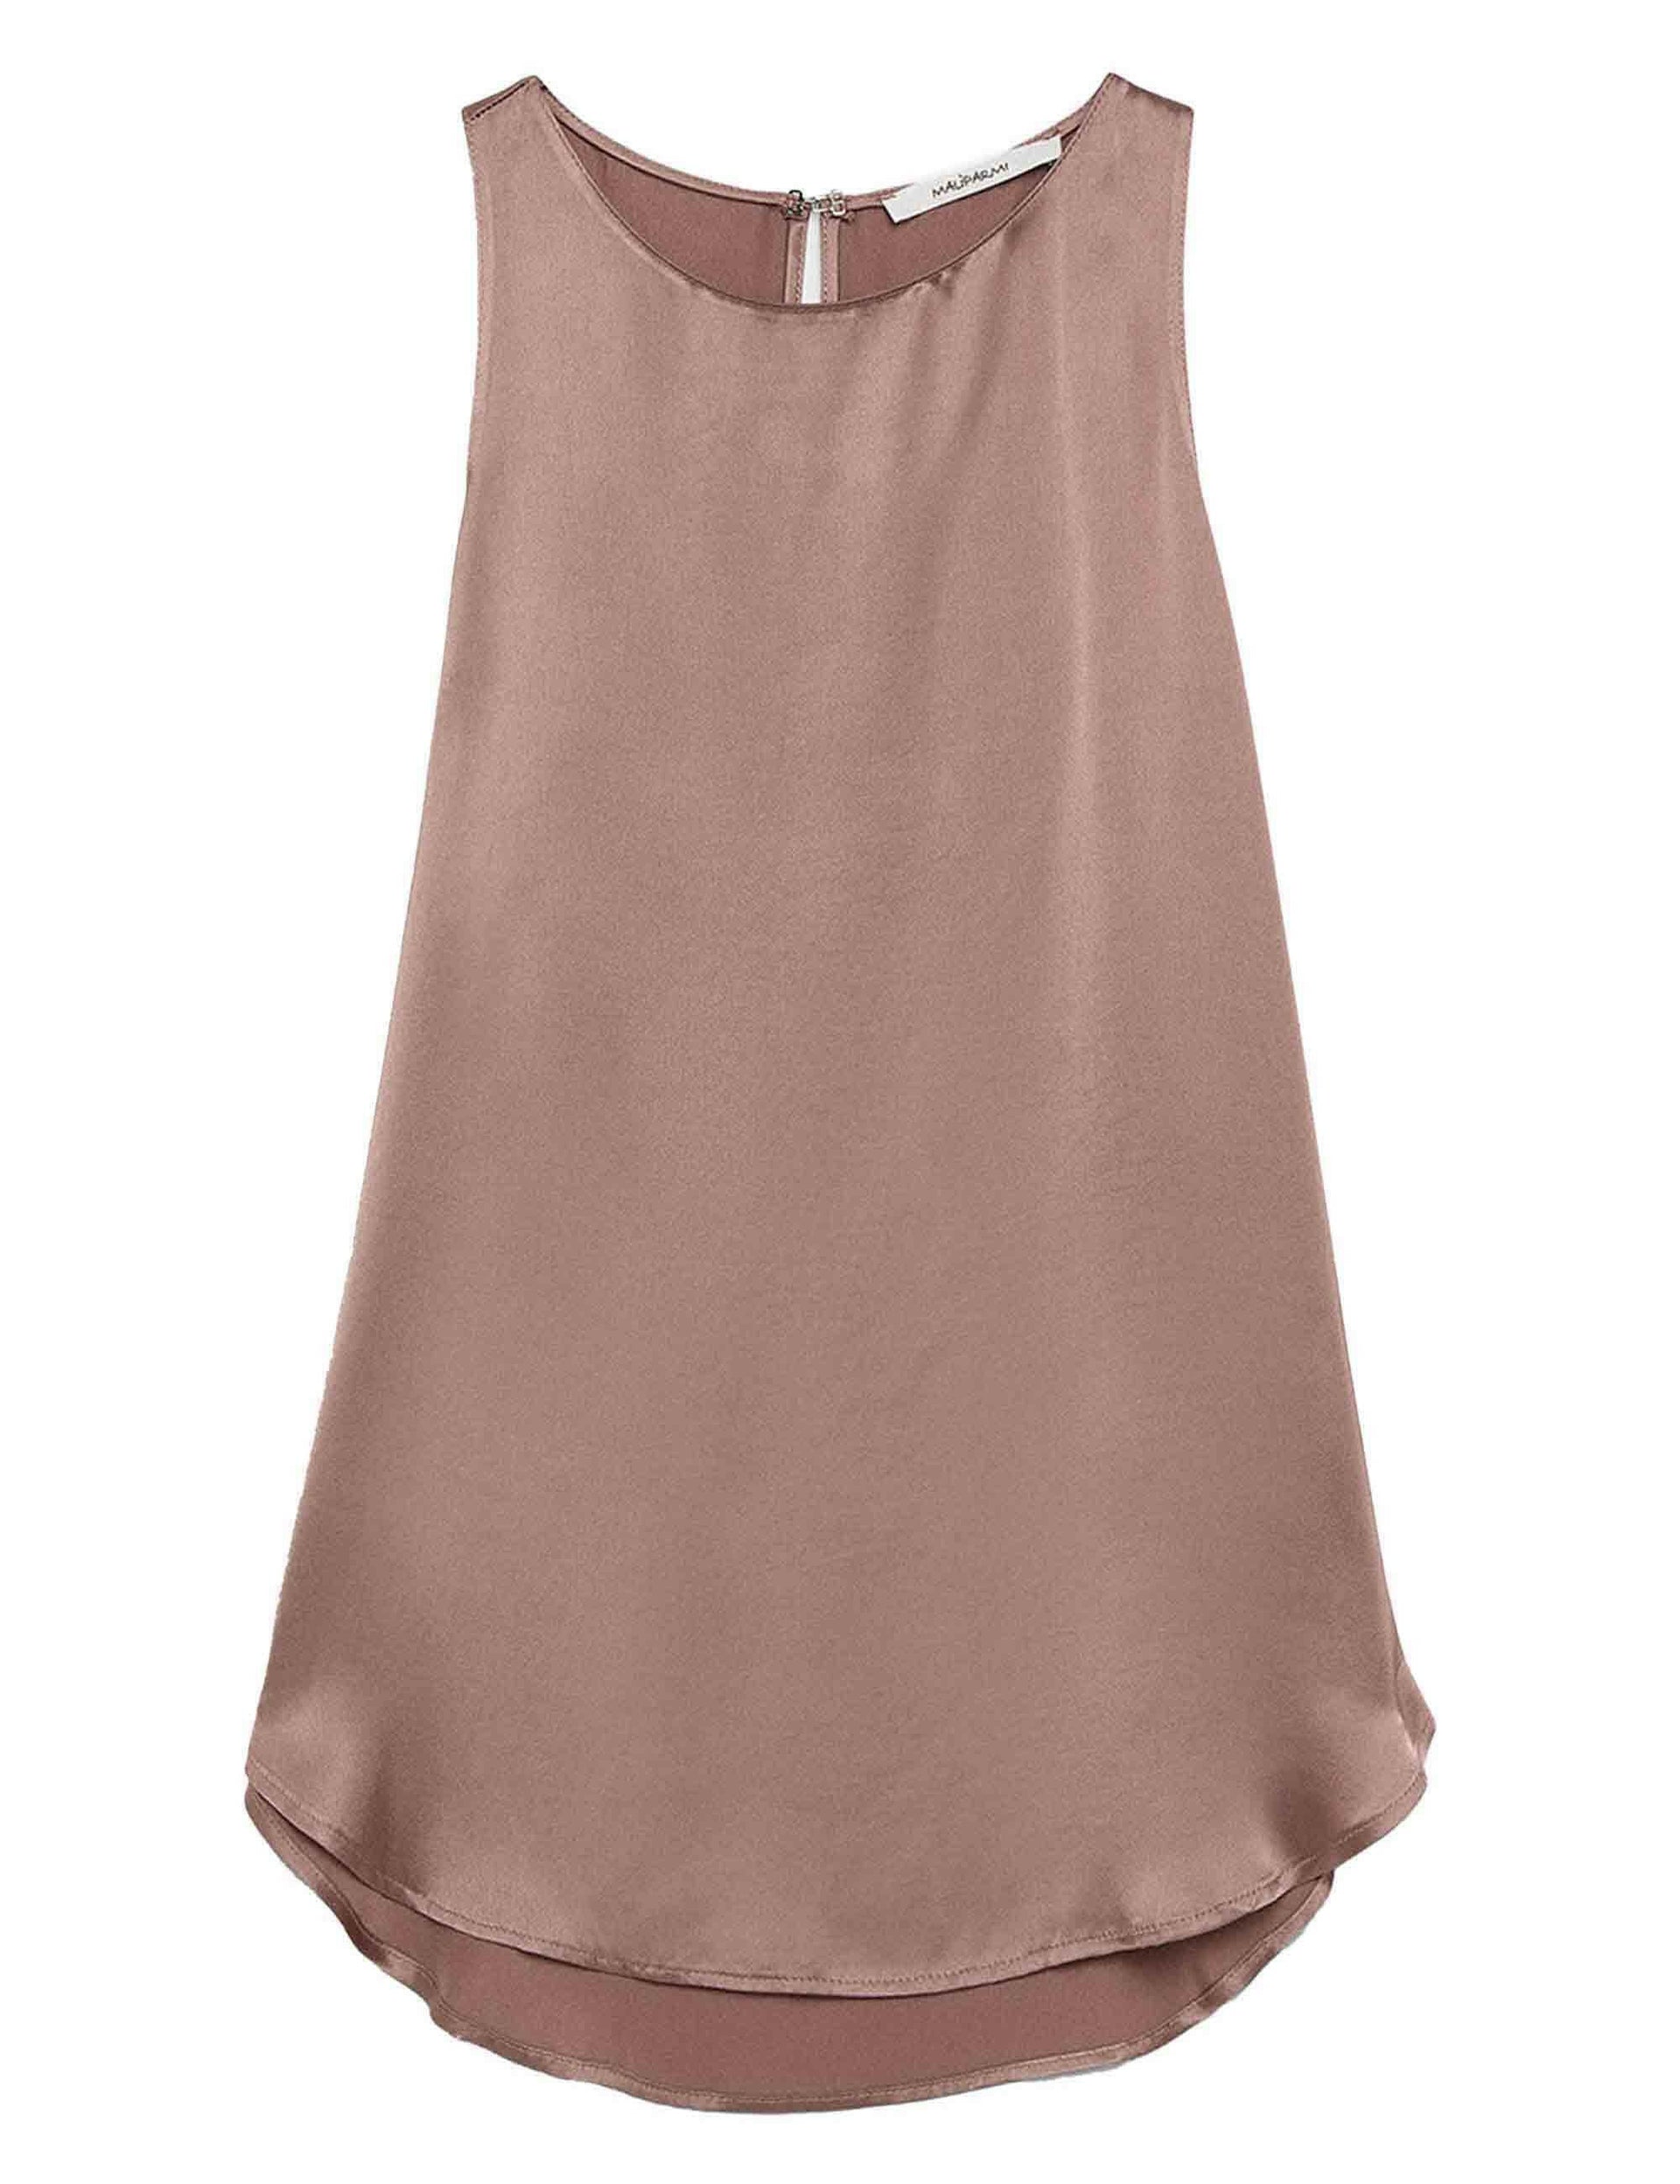 Shiny women's top in brown cady with rounded hem